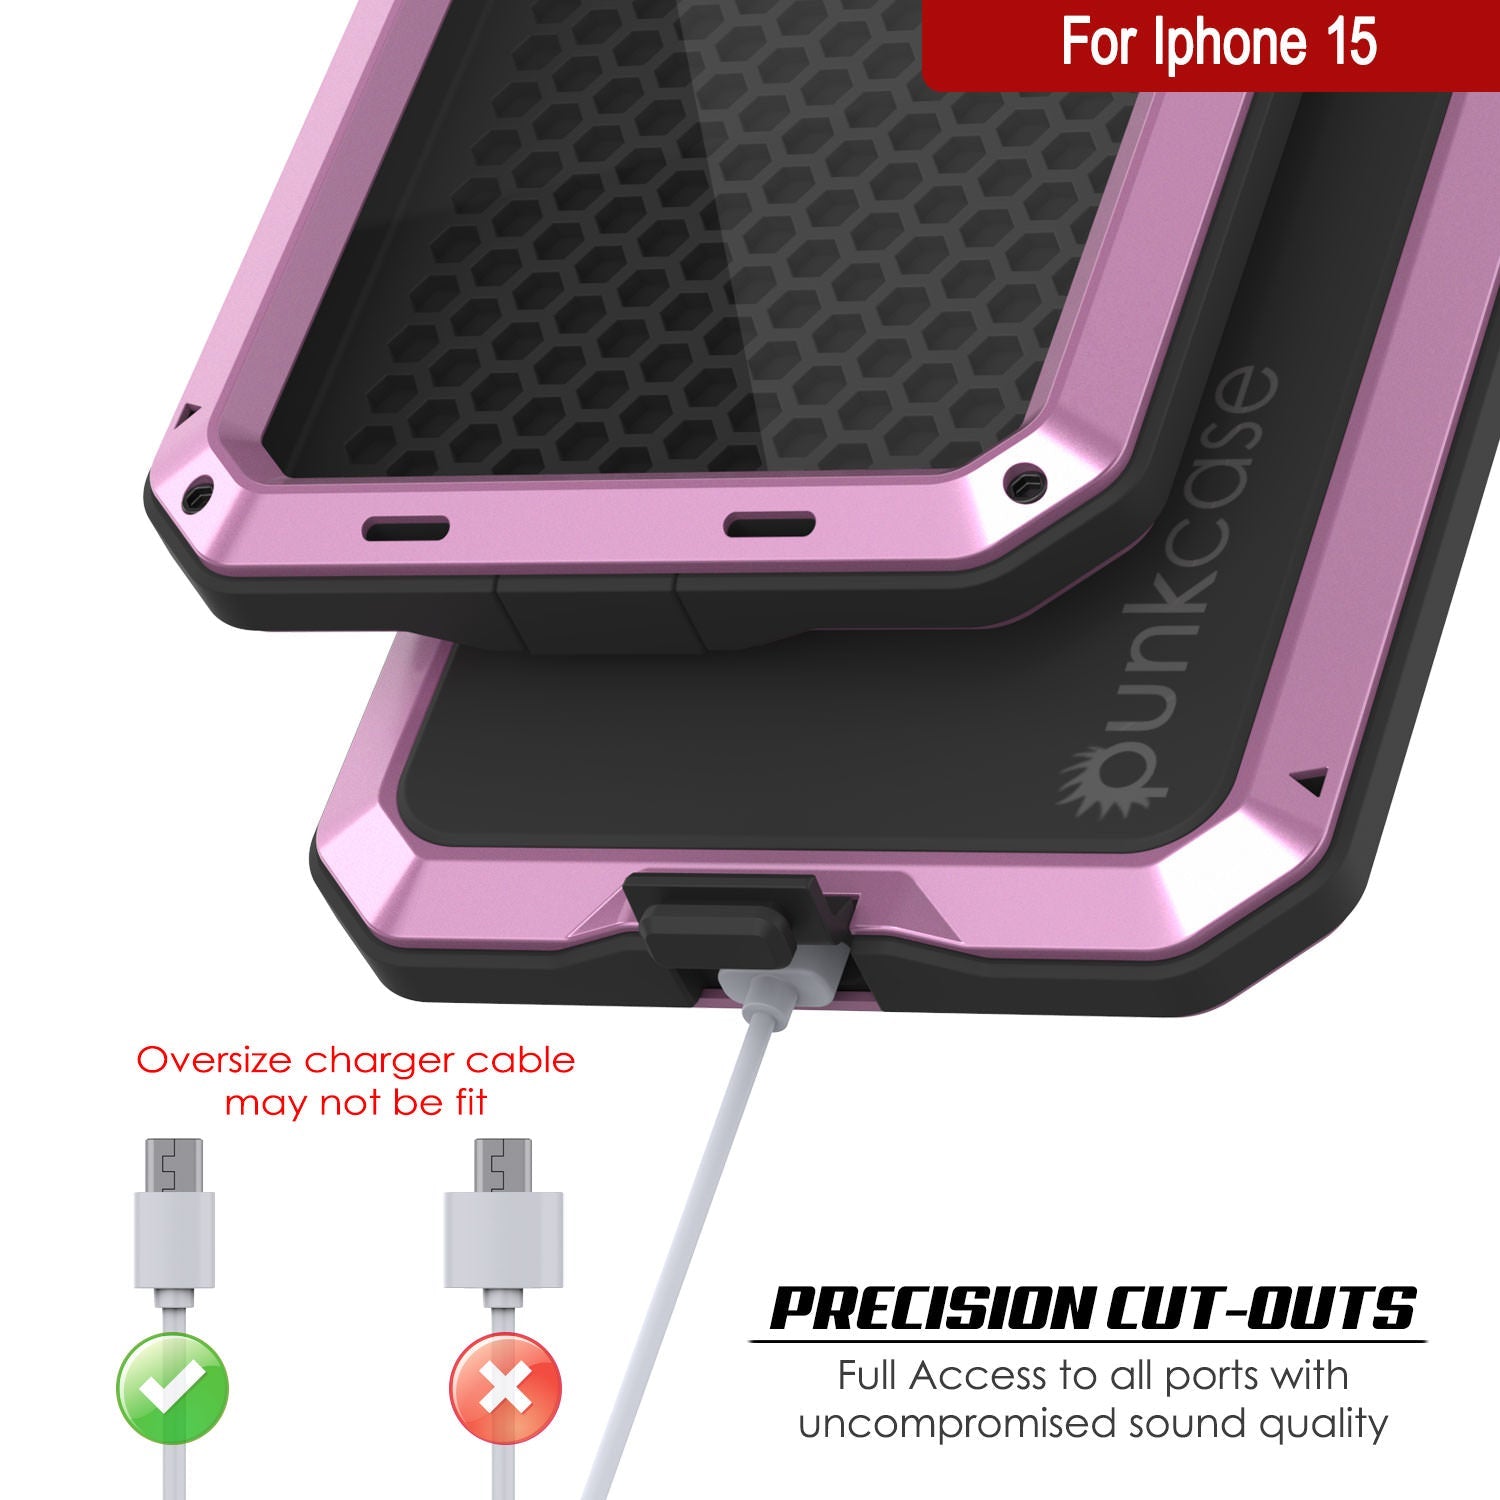 iPhone 15 Metal Case, Heavy Duty Military Grade Armor Cover [shock proof] Full Body Hard [Pink]